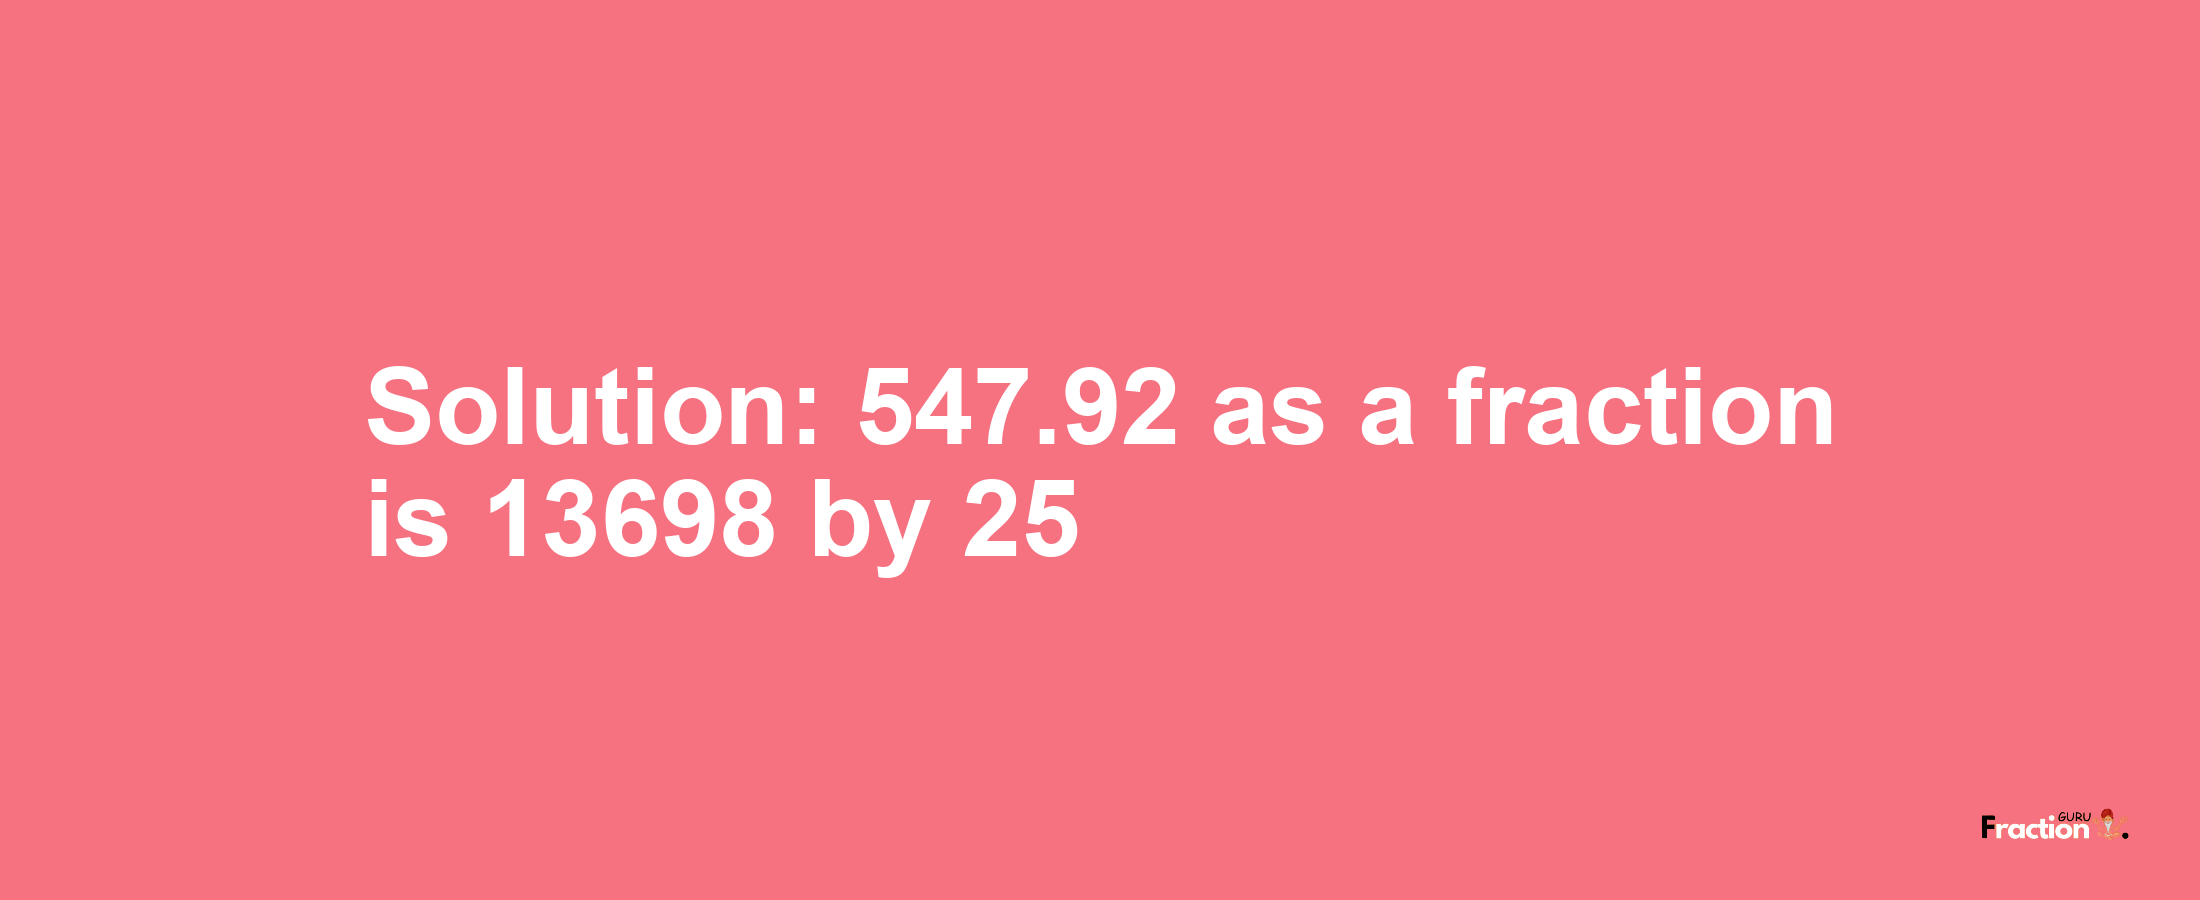 Solution:547.92 as a fraction is 13698/25